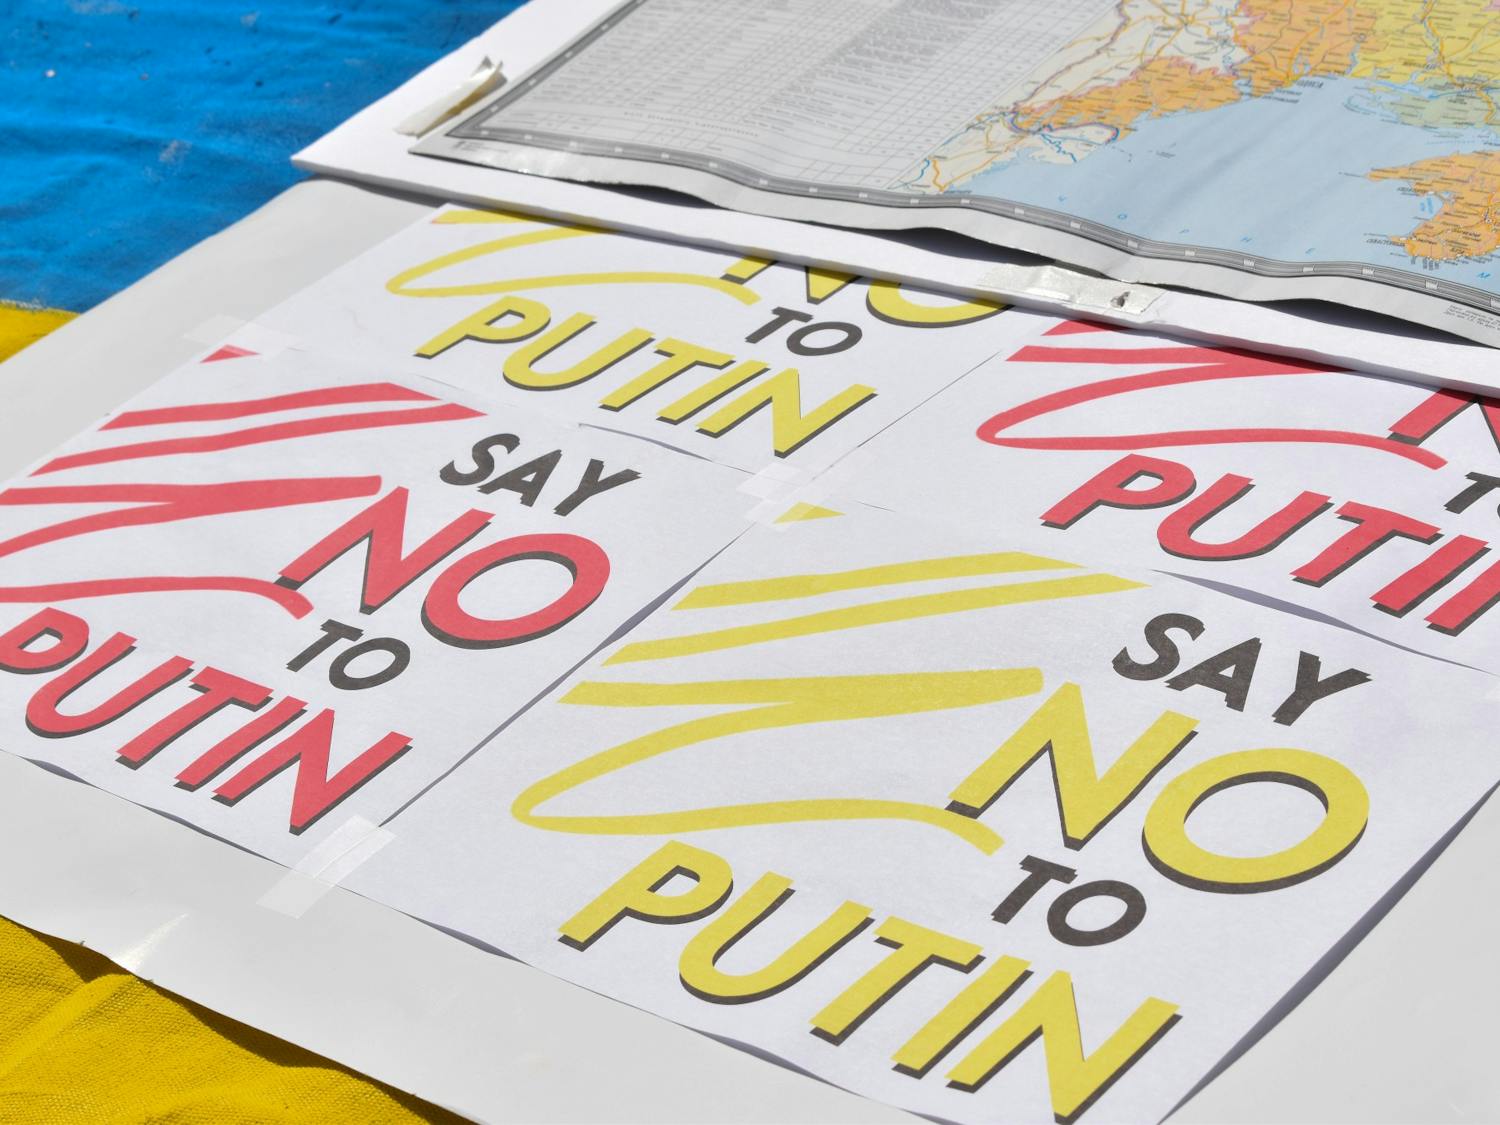 "Say No to Putin" posters lay on tables at the campus rally in solidarity with Ukraine.&nbsp;